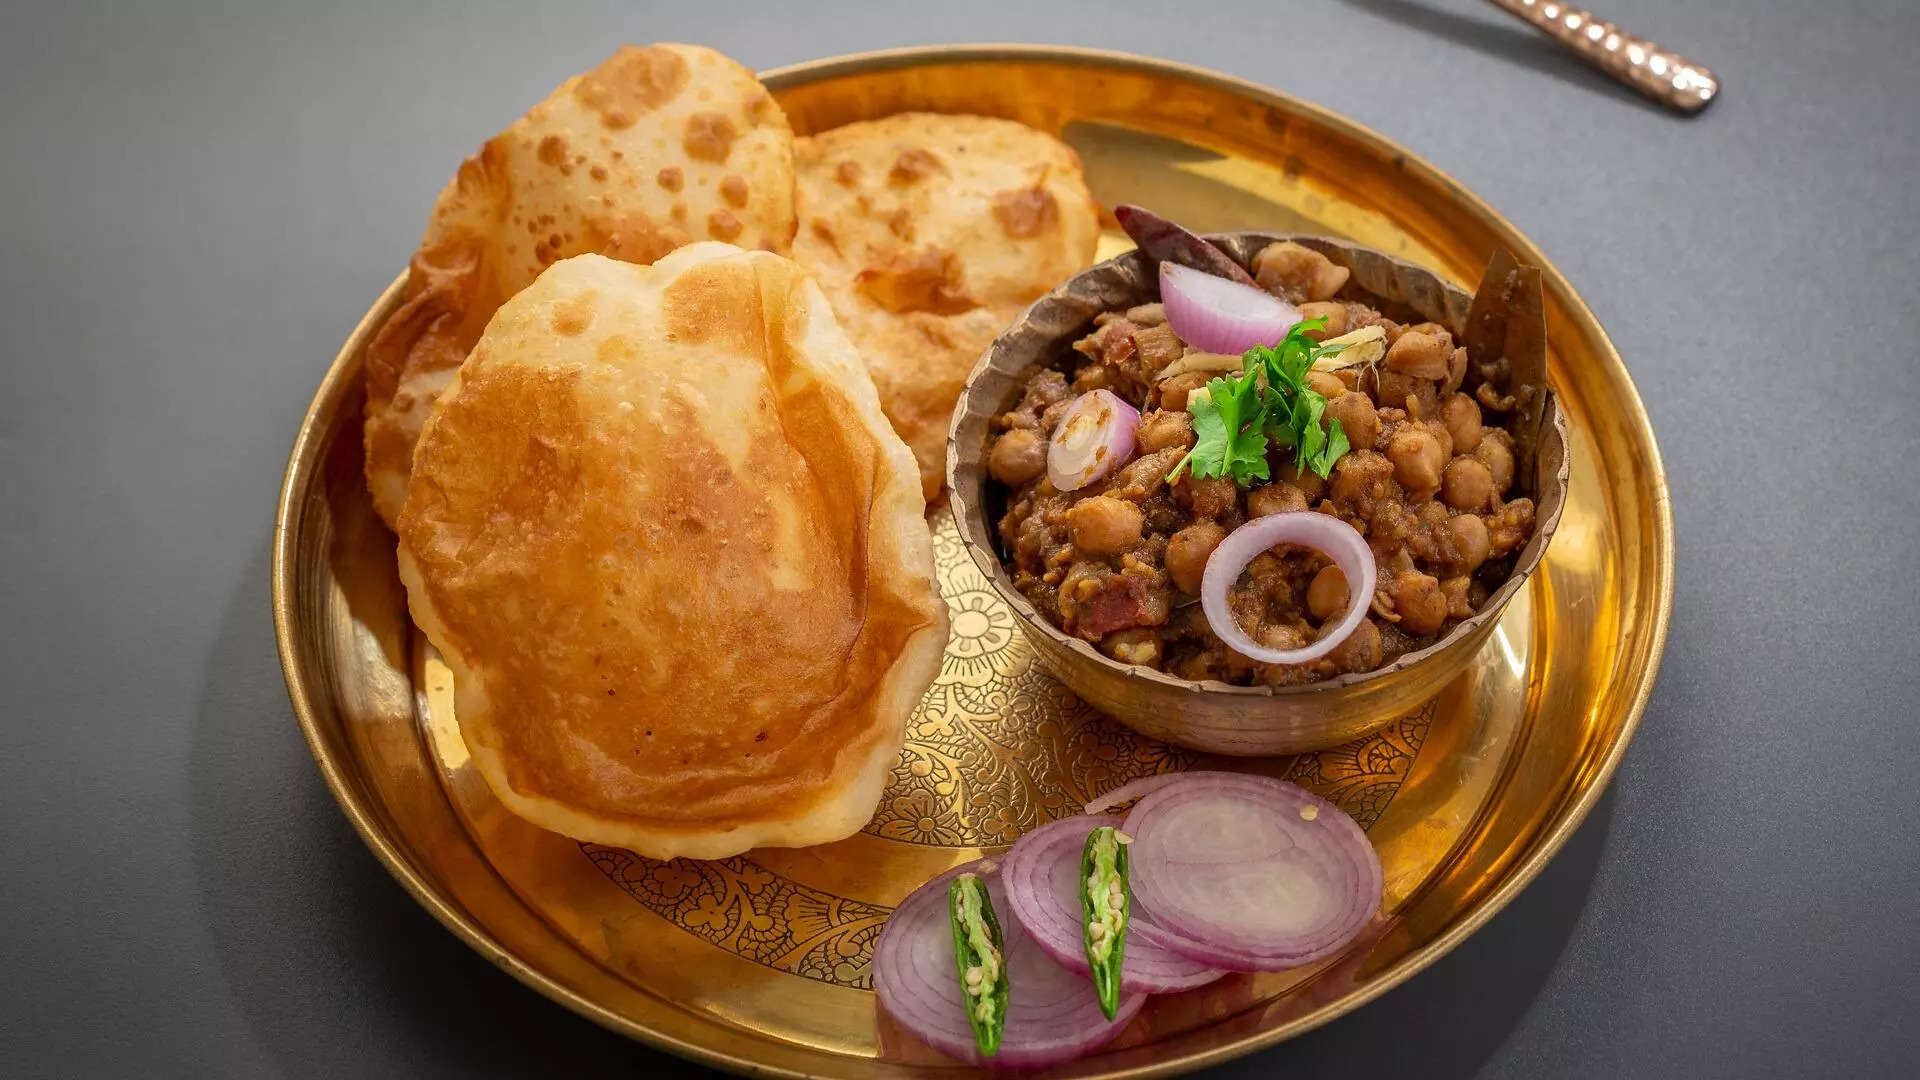 A Food Lover’s Guide: 7 Delectable Dishes to Try in Delhi